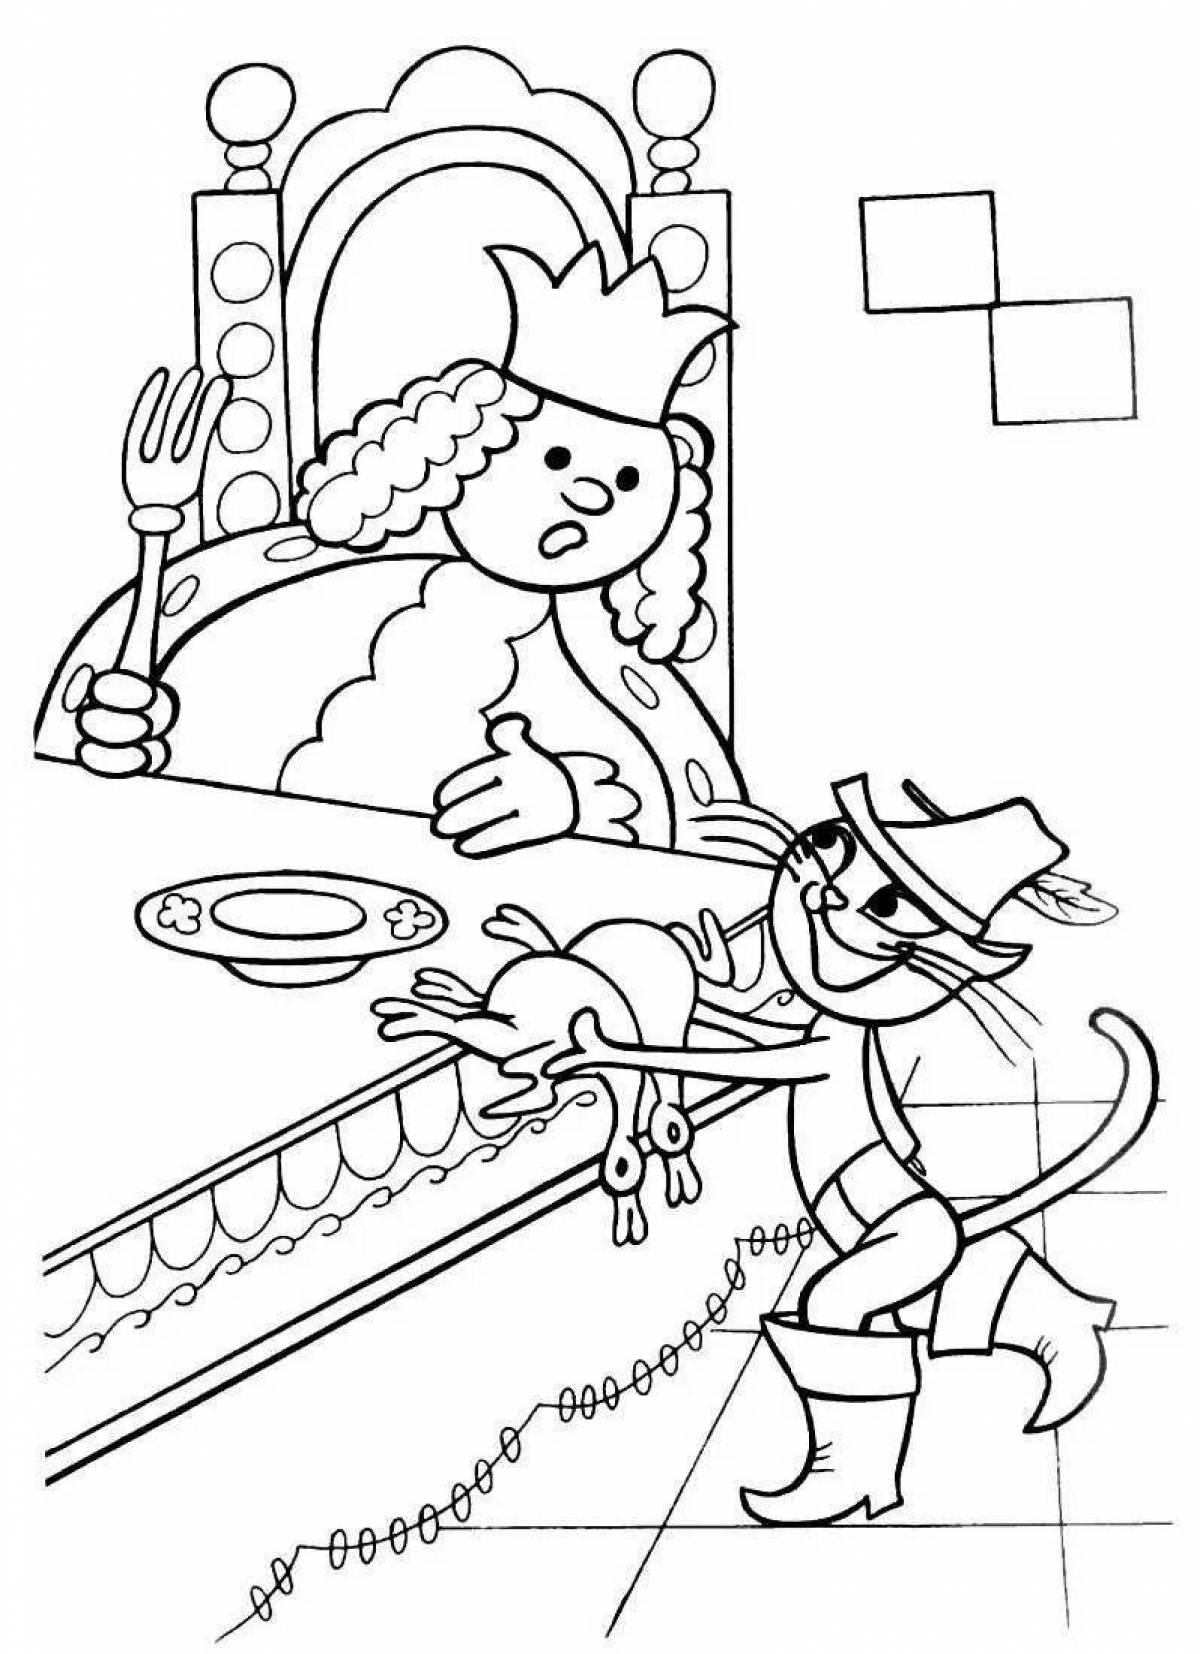 Charles Perrault's exquisite Puss in Boots coloring book